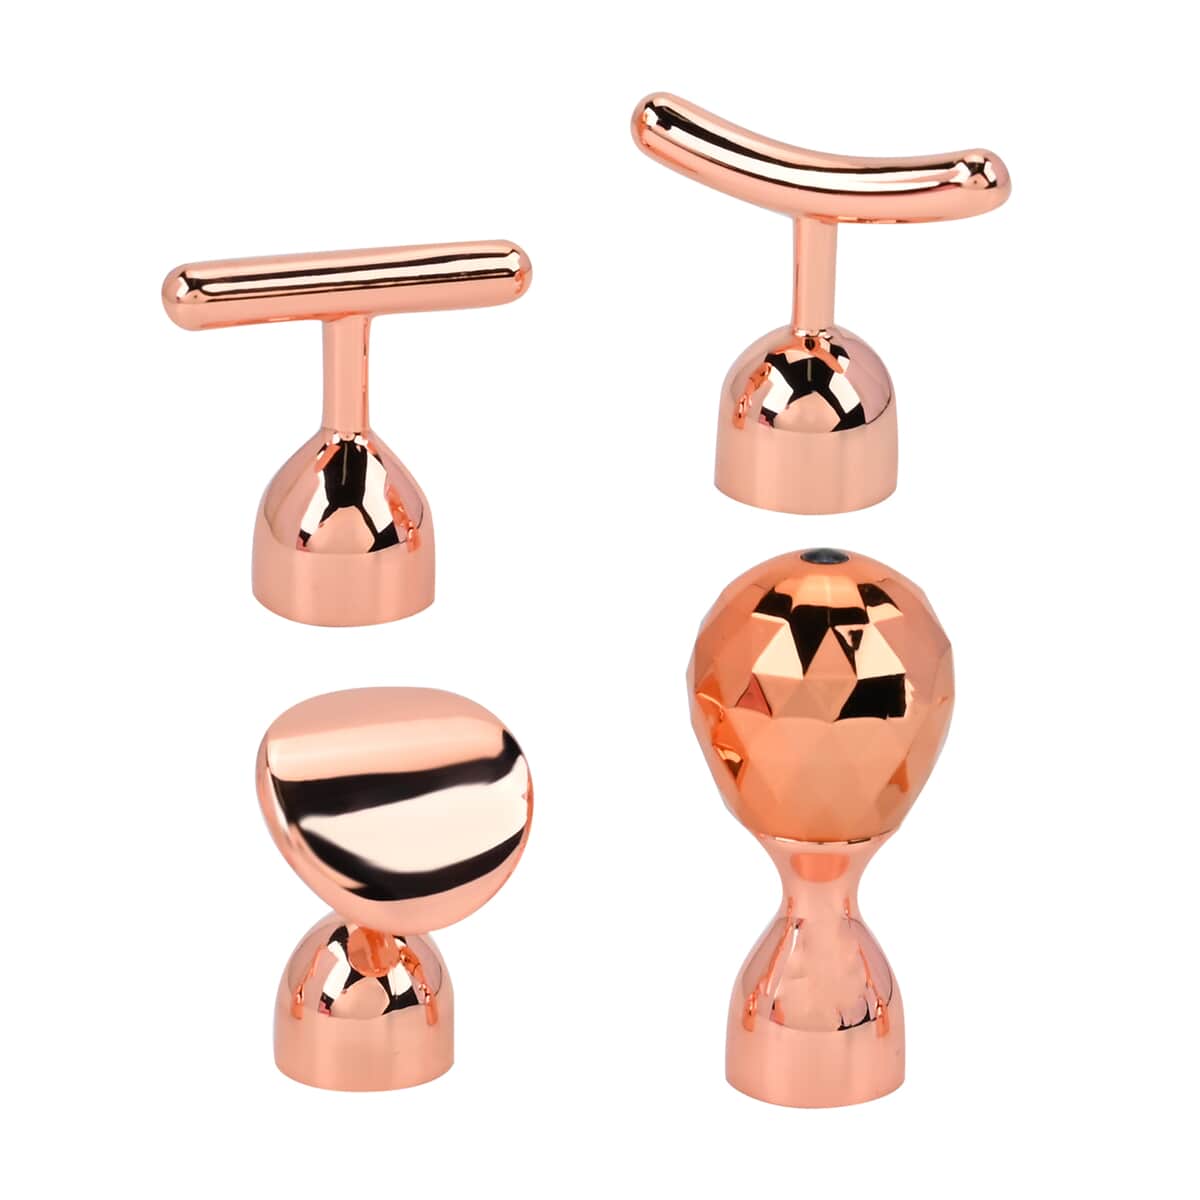 4-in-1 Face Massager Rollers with Four Interchangeable Massage Heads - Rose Gold (5.9"x1.49"), 1xAA Battery Not Including image number 7